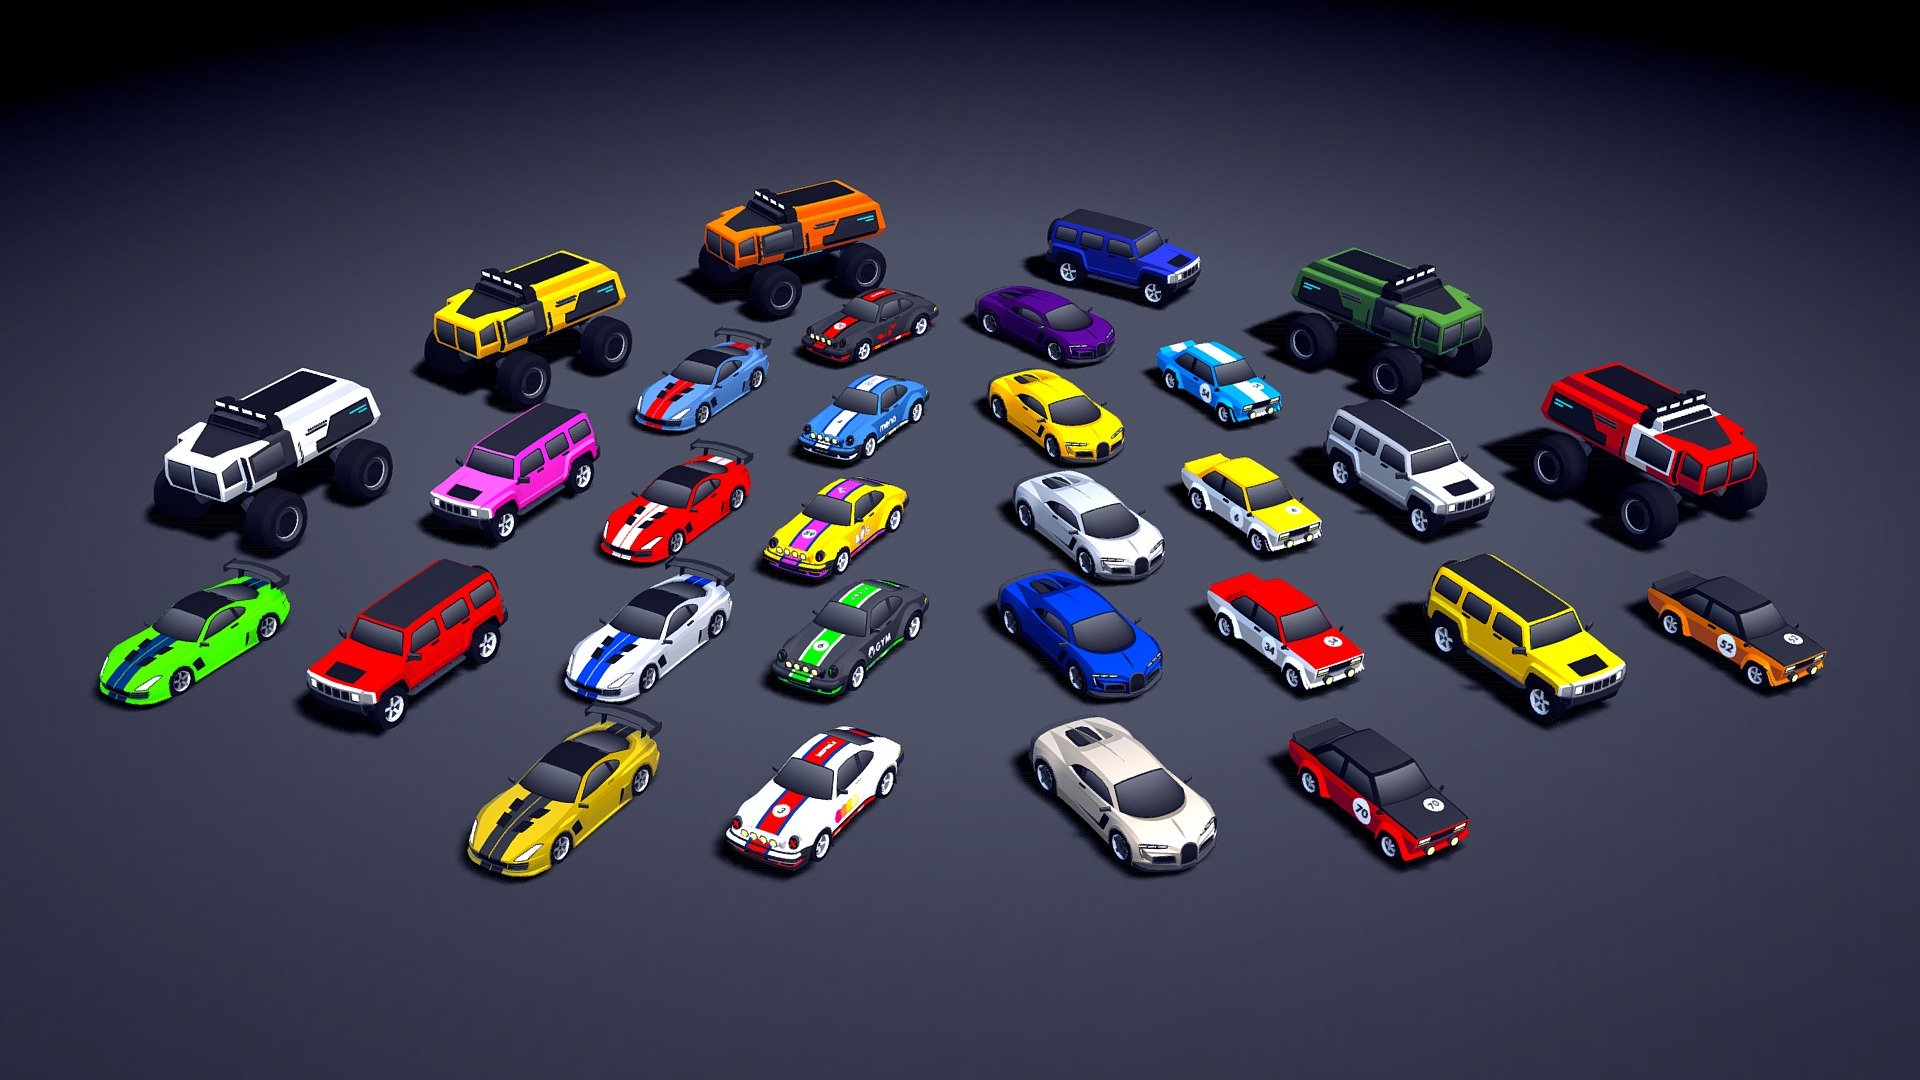 All these vehicles will be added to ARCADE: Ultimate Vehicles Pack in March 8th with no additional cost. Available in Unity3D (in the Unity Asset Store and Sketchfab.

This update includes cars, trucks and space rovers!. I hope you like it

Best regards, Mena 3d model